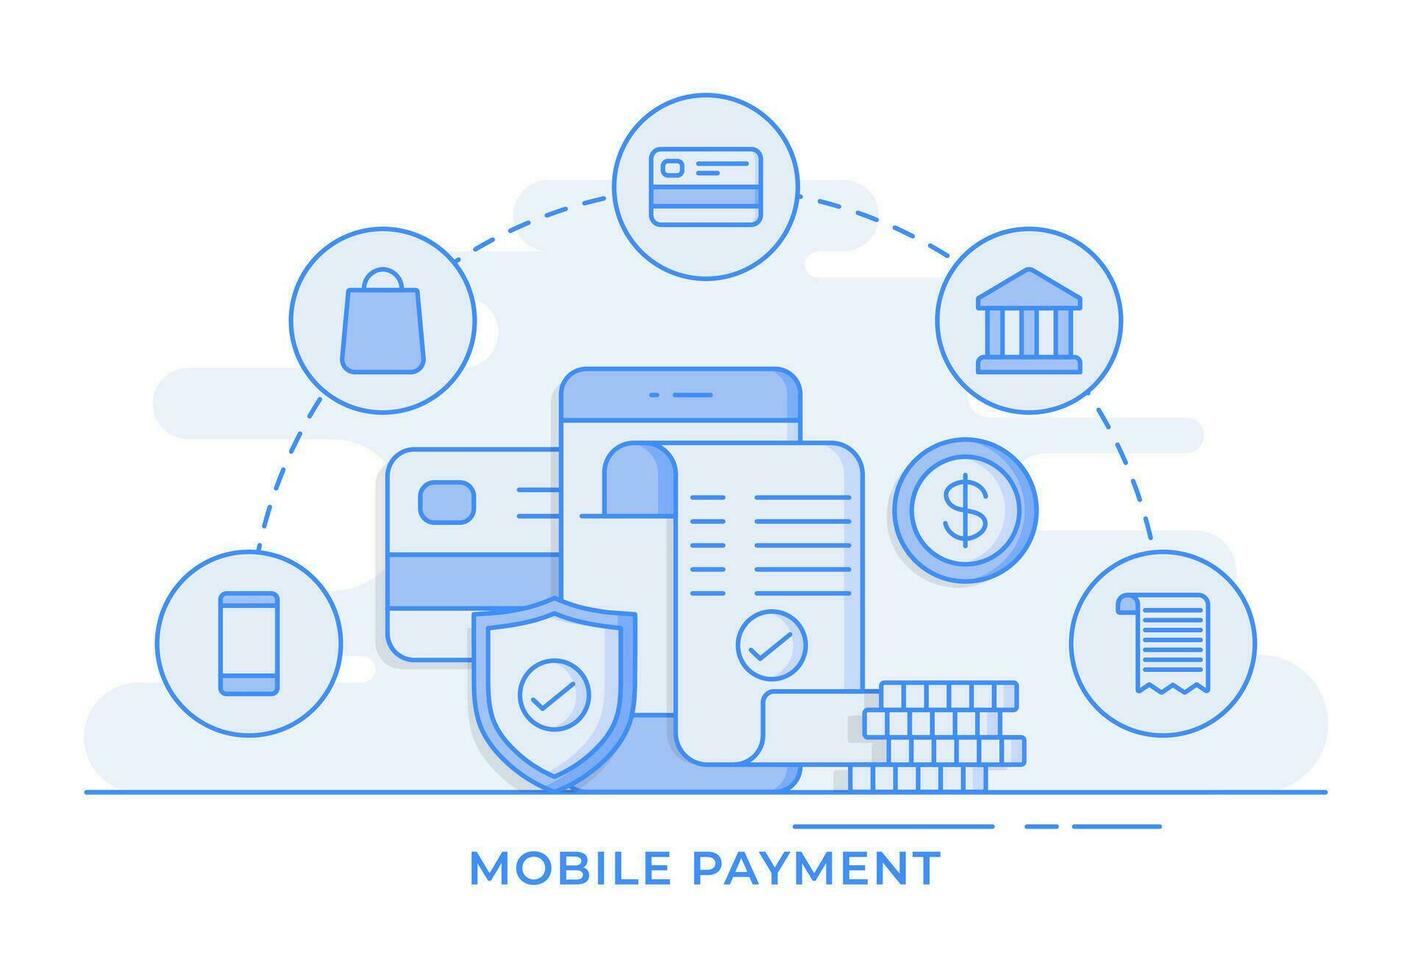 Mobile phone bill payment, Paid by credit card, Online shopping thin line flat illustration infographic for landing page, banner, mobile app, Web design, UI UX vector